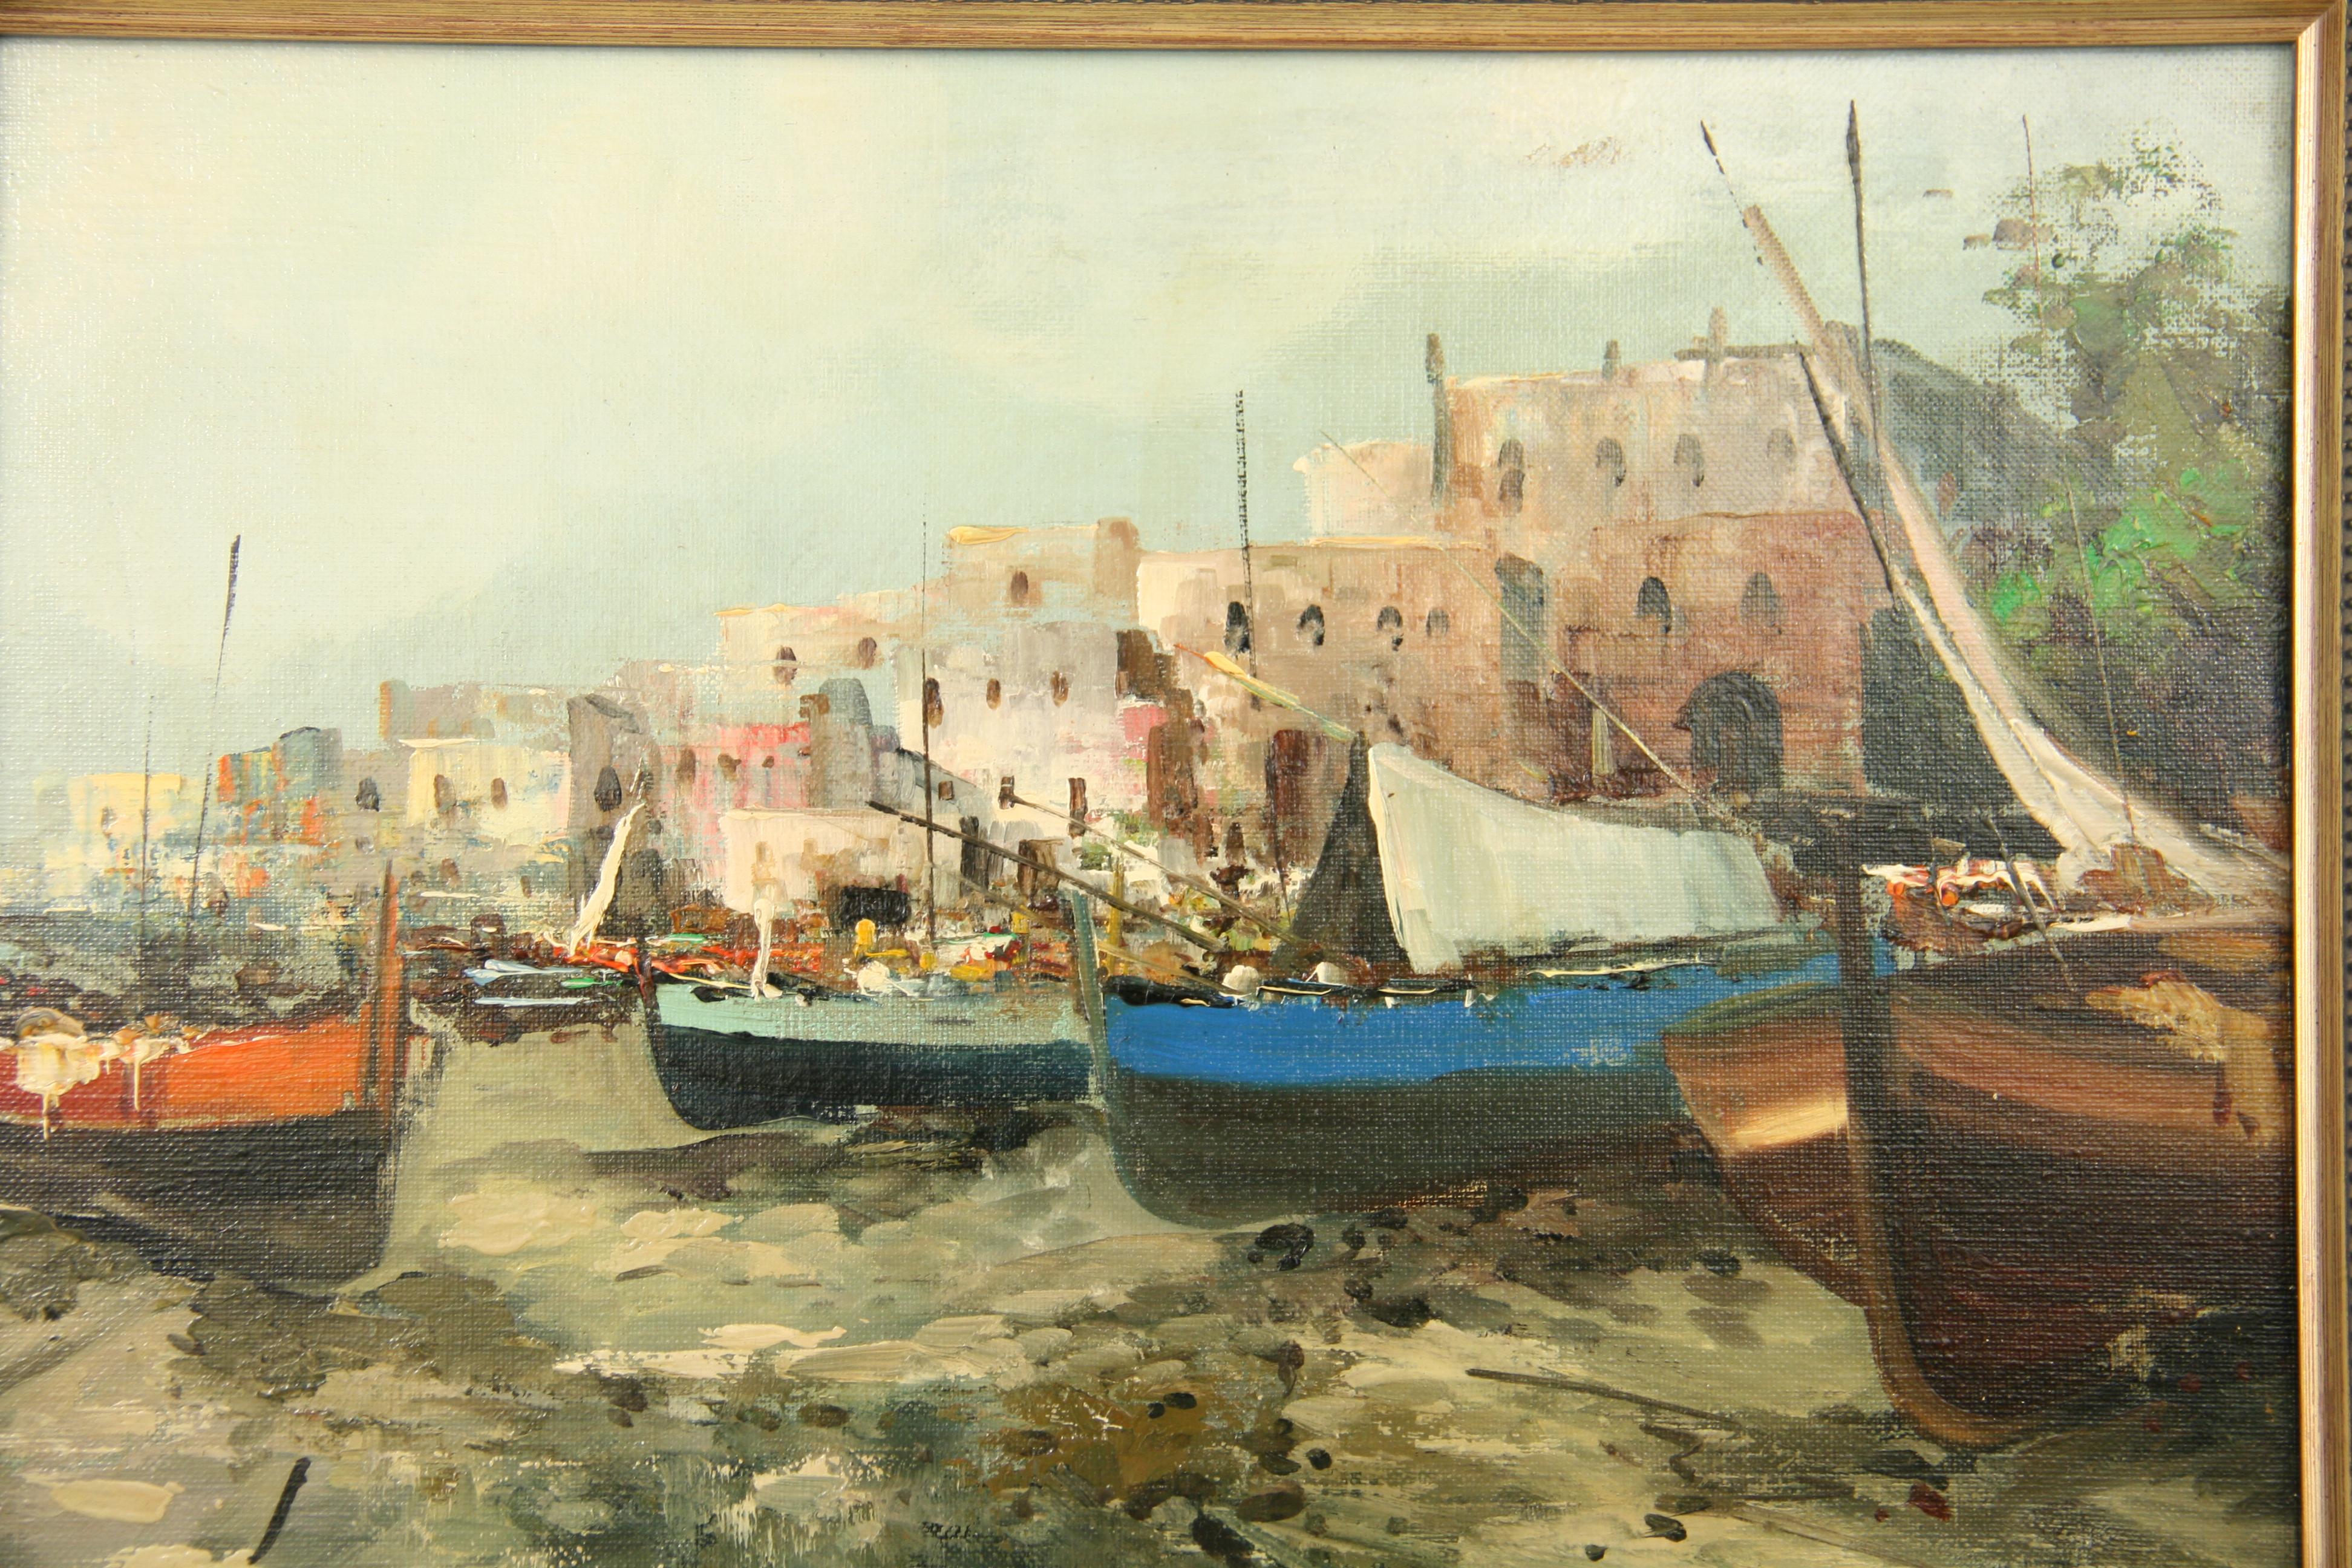 4085 Stylish and well painted 1950's Italian harbor scene
Italian Seascape, oil on canvas applied to board, displayed in a gilt wood frame, signed by De Angelis.
Image size 10.5 H x 13.25 W